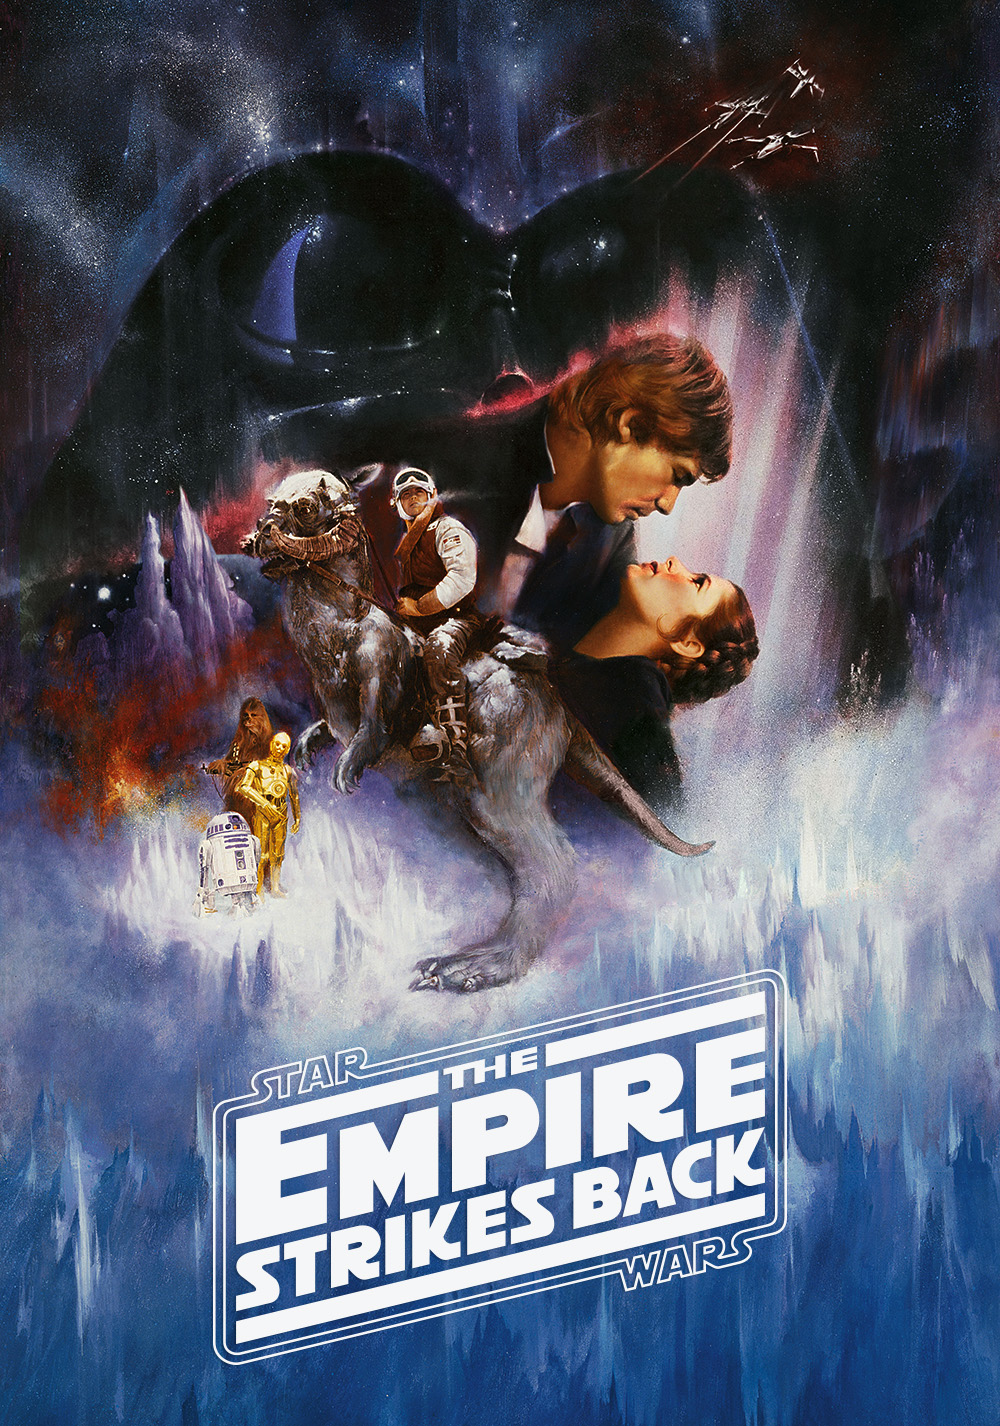 Star Wars Episode V The Empire Strikes Back Movie Poster Id 125293